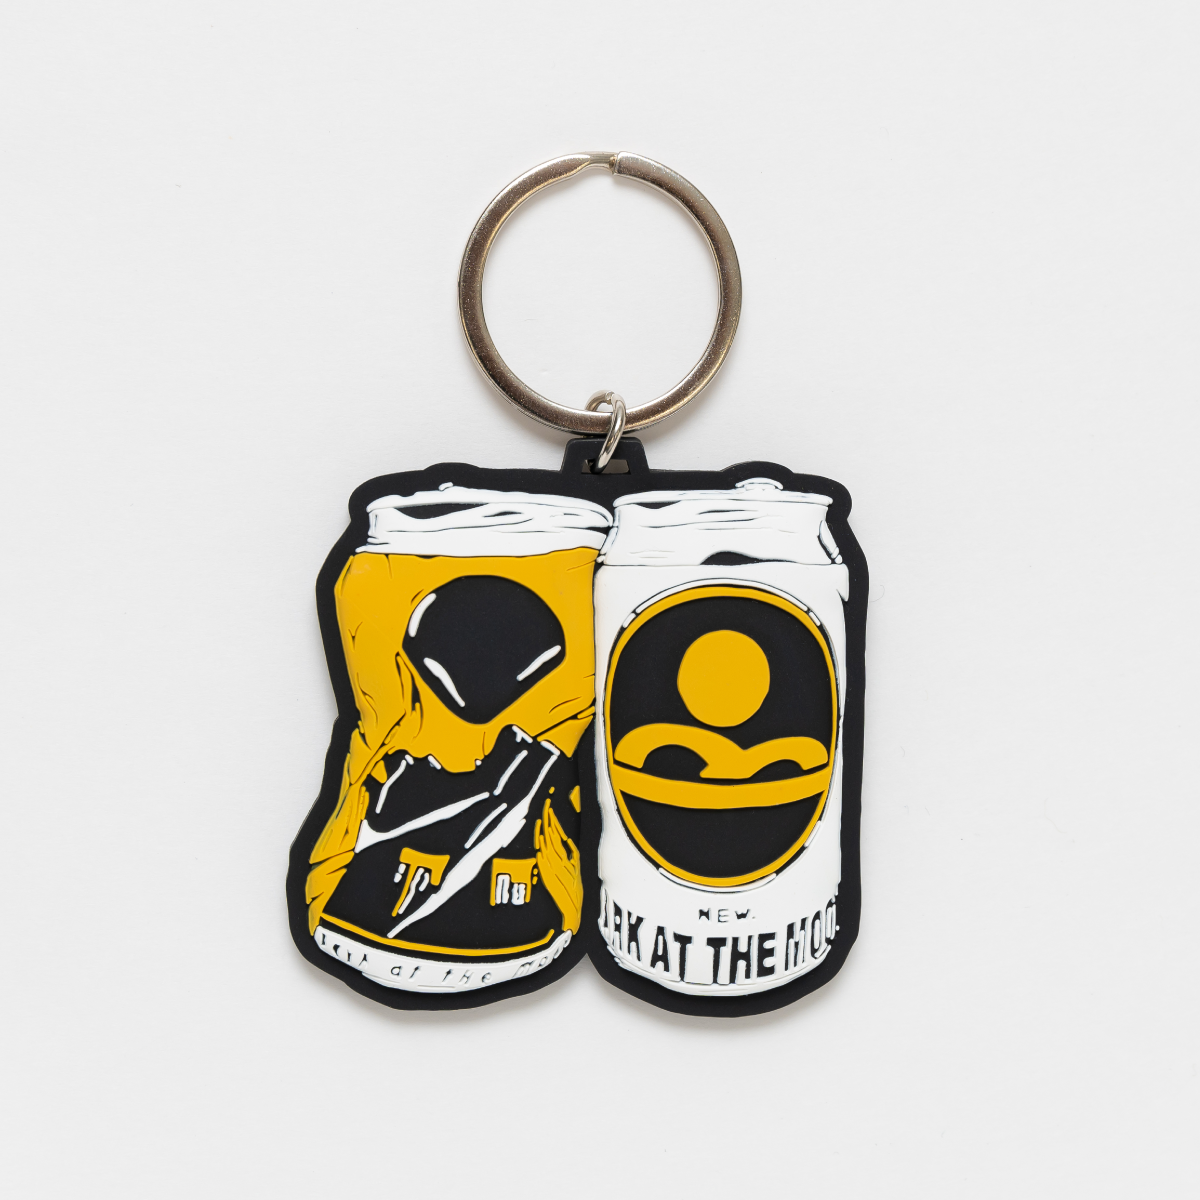 Old and New rubber keychain